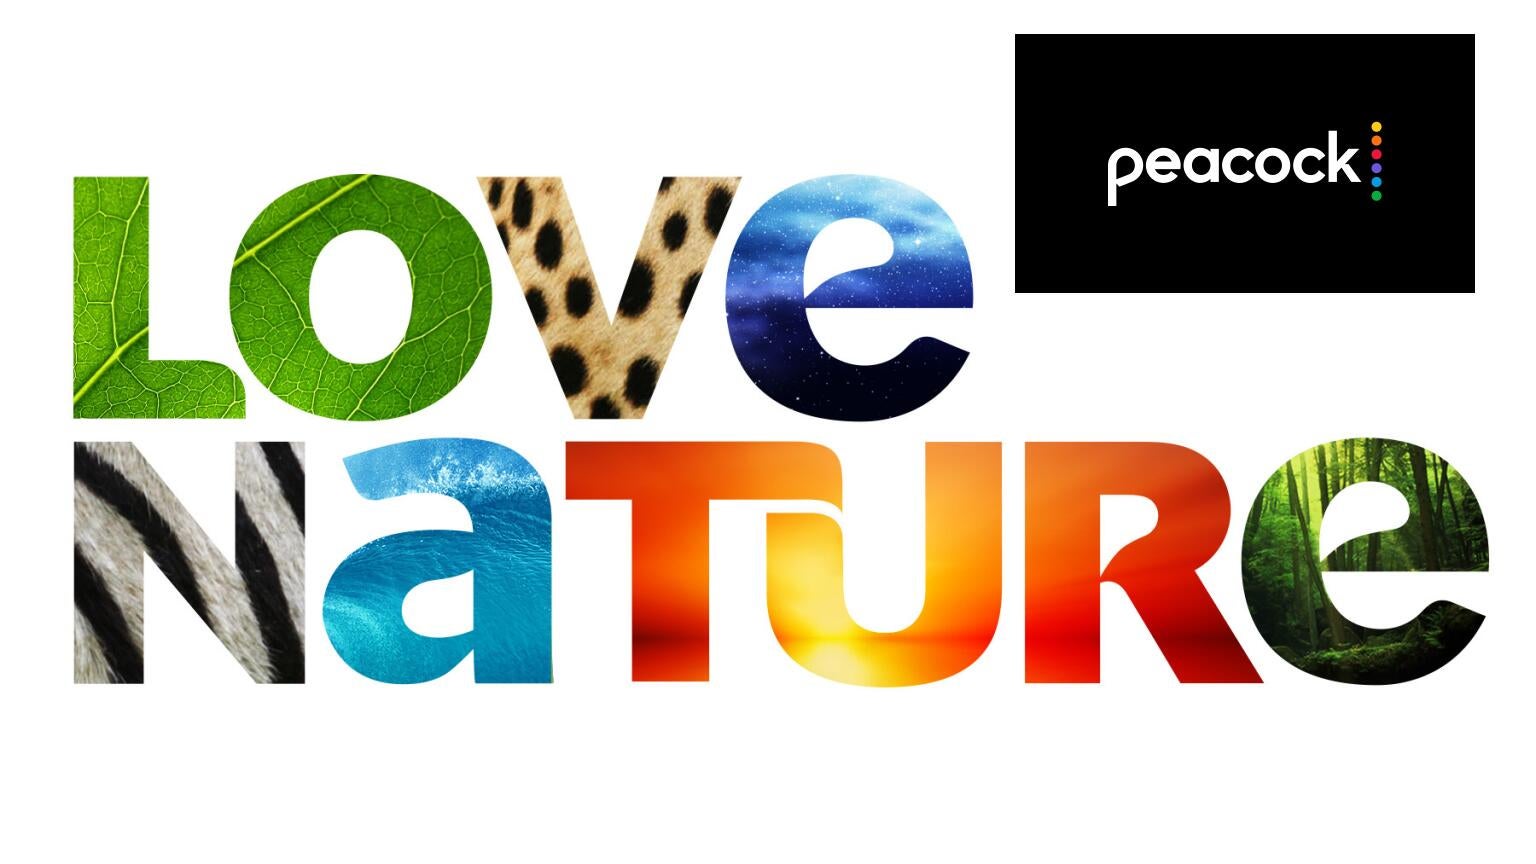 Love Nature joins Hallmark, Reelz, and more in Peacock's lineup of streaming channels.